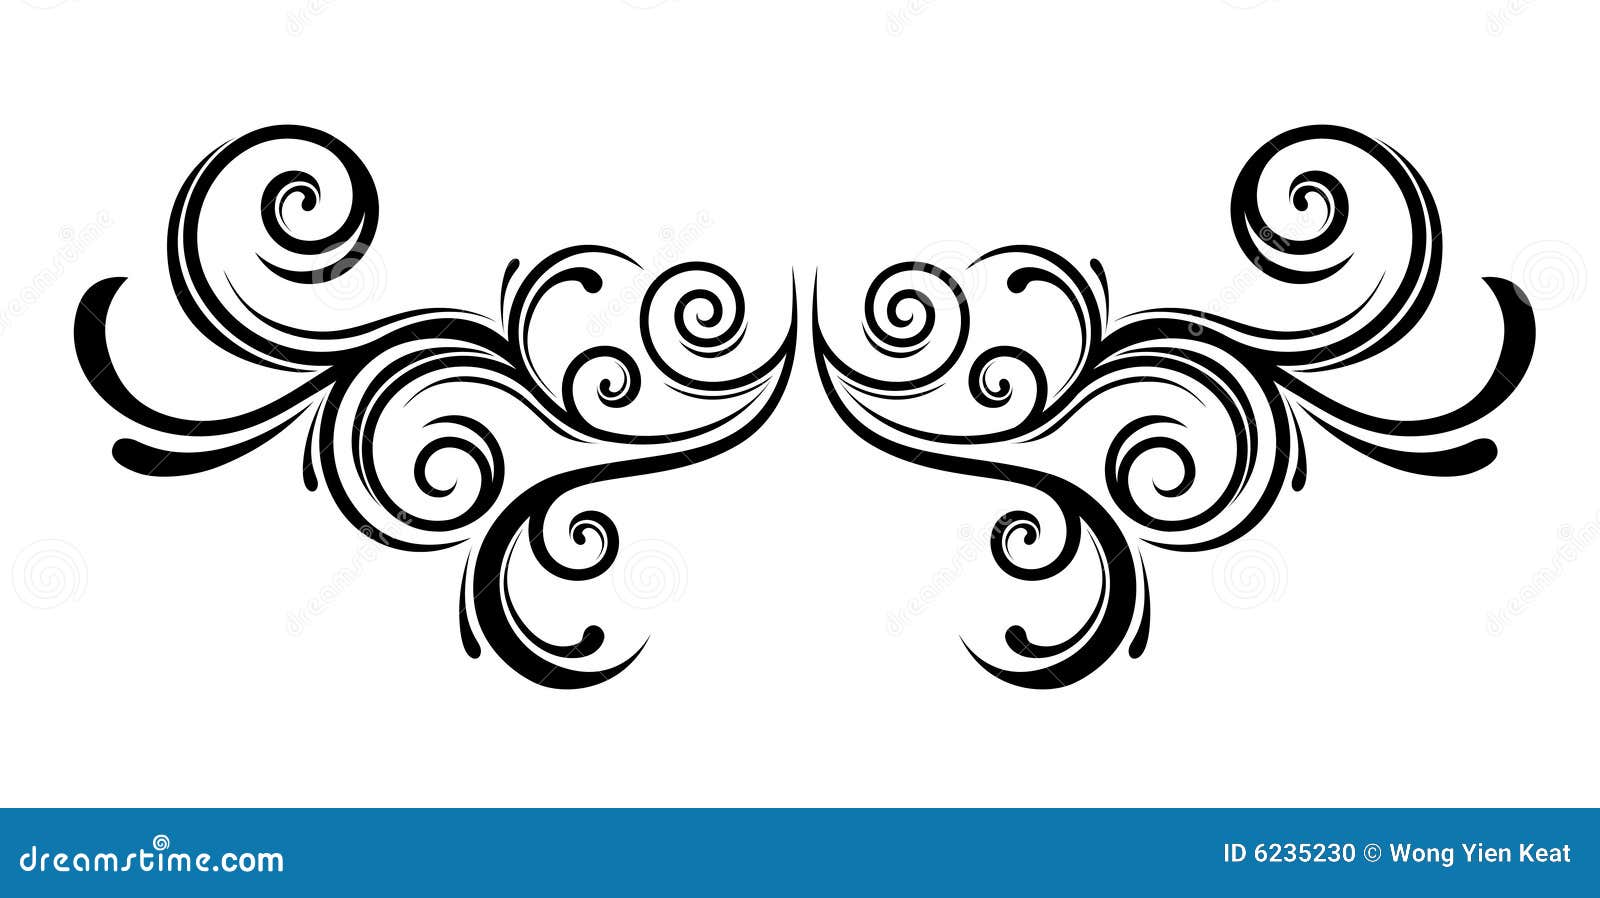 Flora Ornament stock vector. Illustration of isolated ...